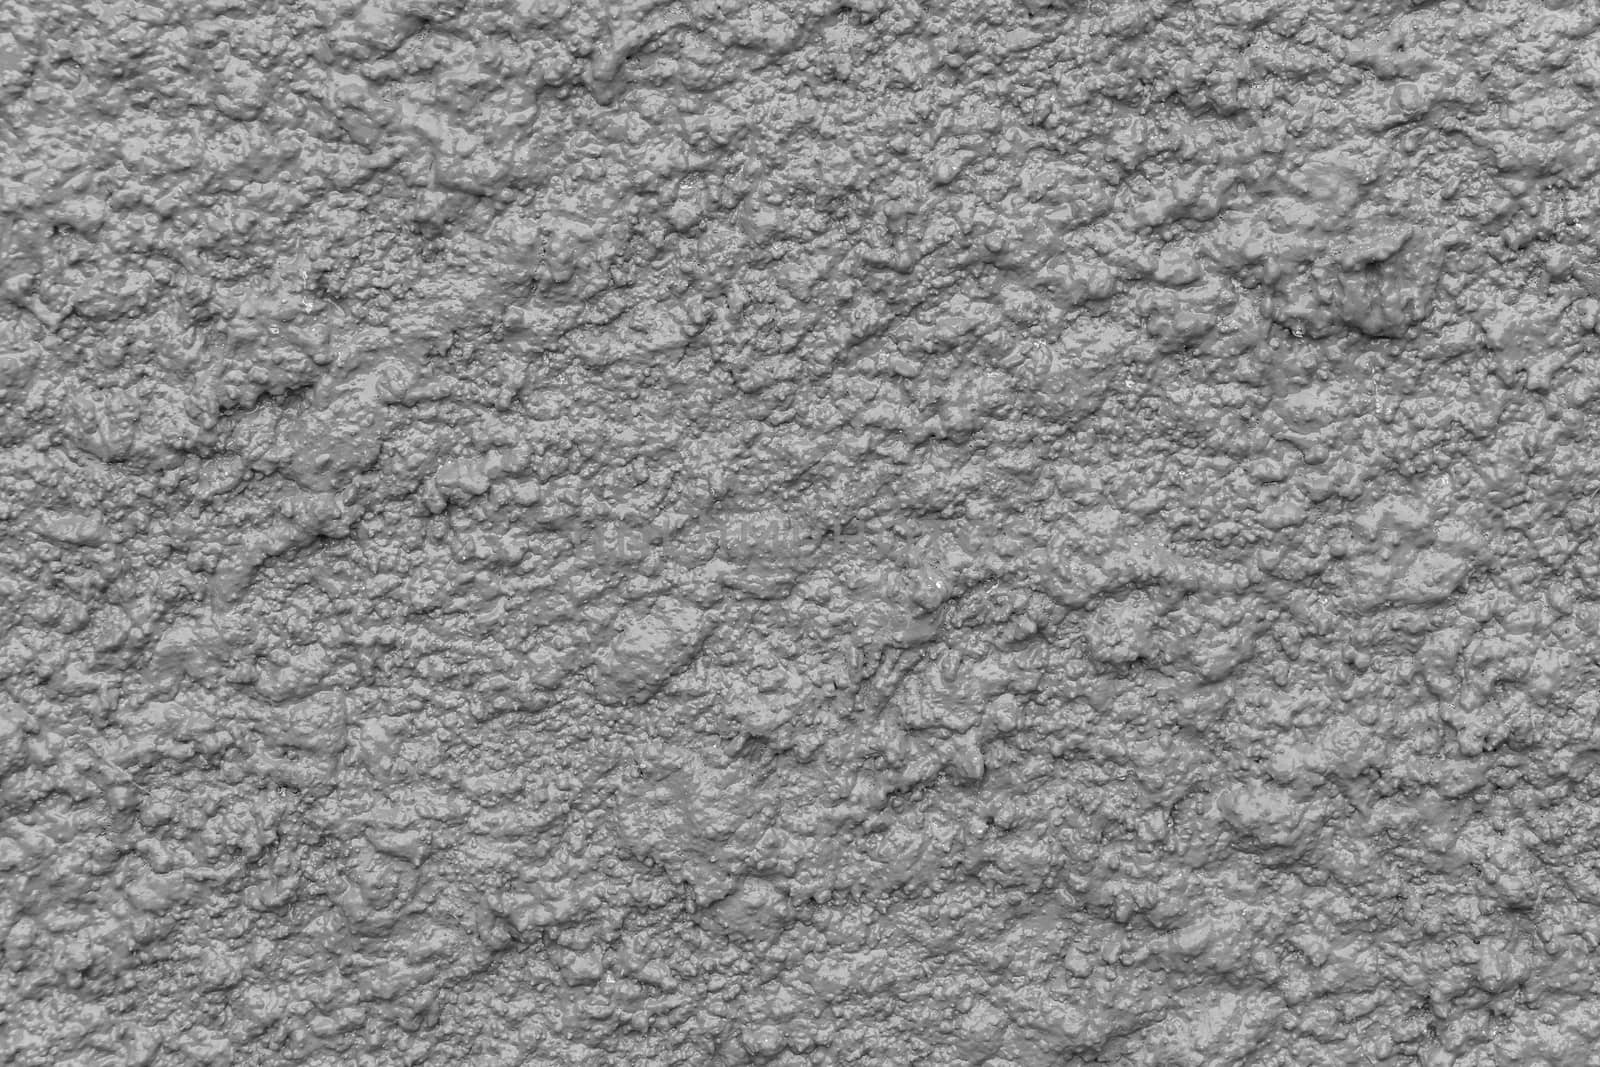 Gray bump plaster wall coating with oil paint texture